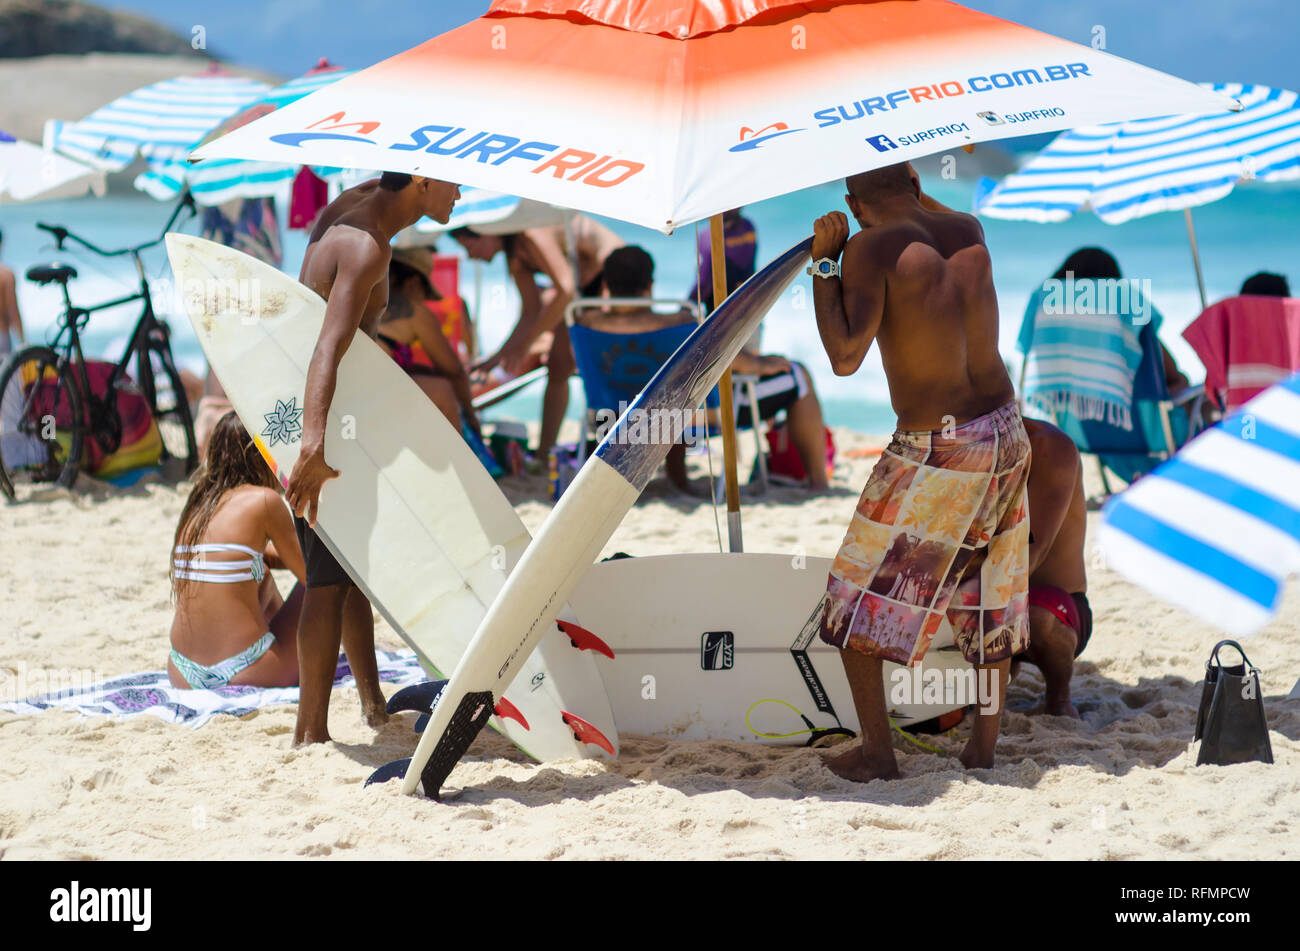 RIO DE JANEIRO - FEBRUARY 9, 2017: Young Brazilian surfers prepare their surfboards for a busy day of rentals at the Arpoador surf beach at Ipanema. Stock Photo